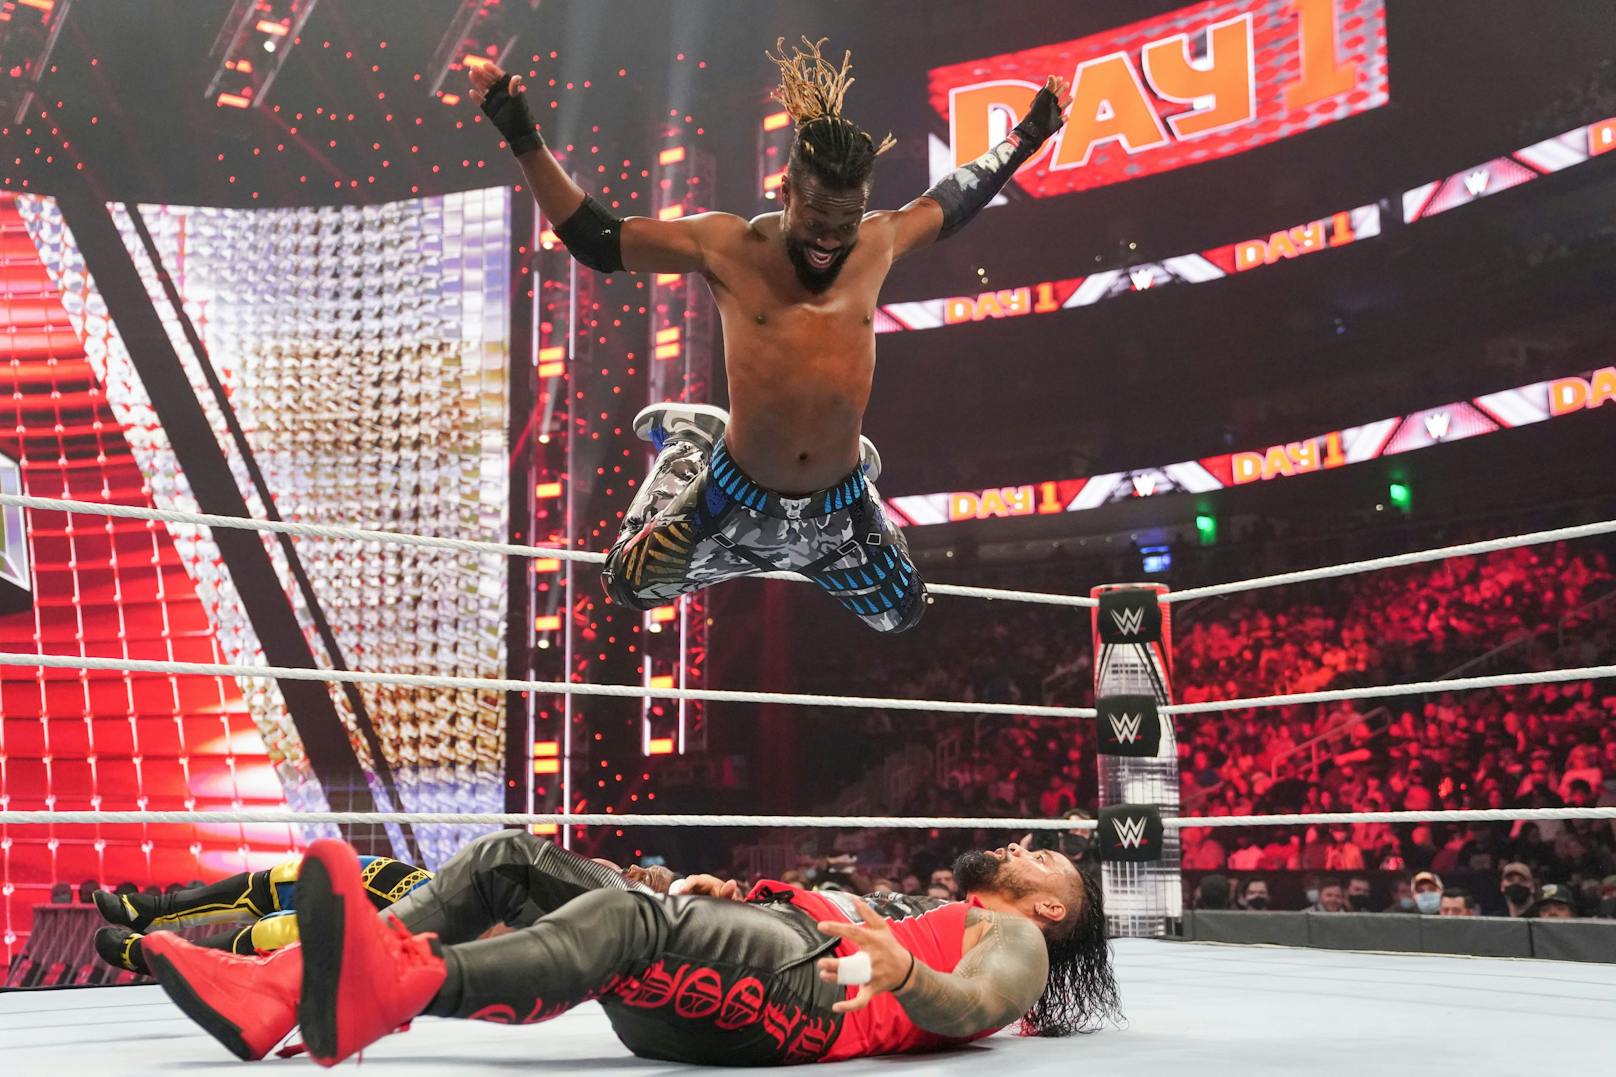 WWE Day 1: The Usos vs. The New Day